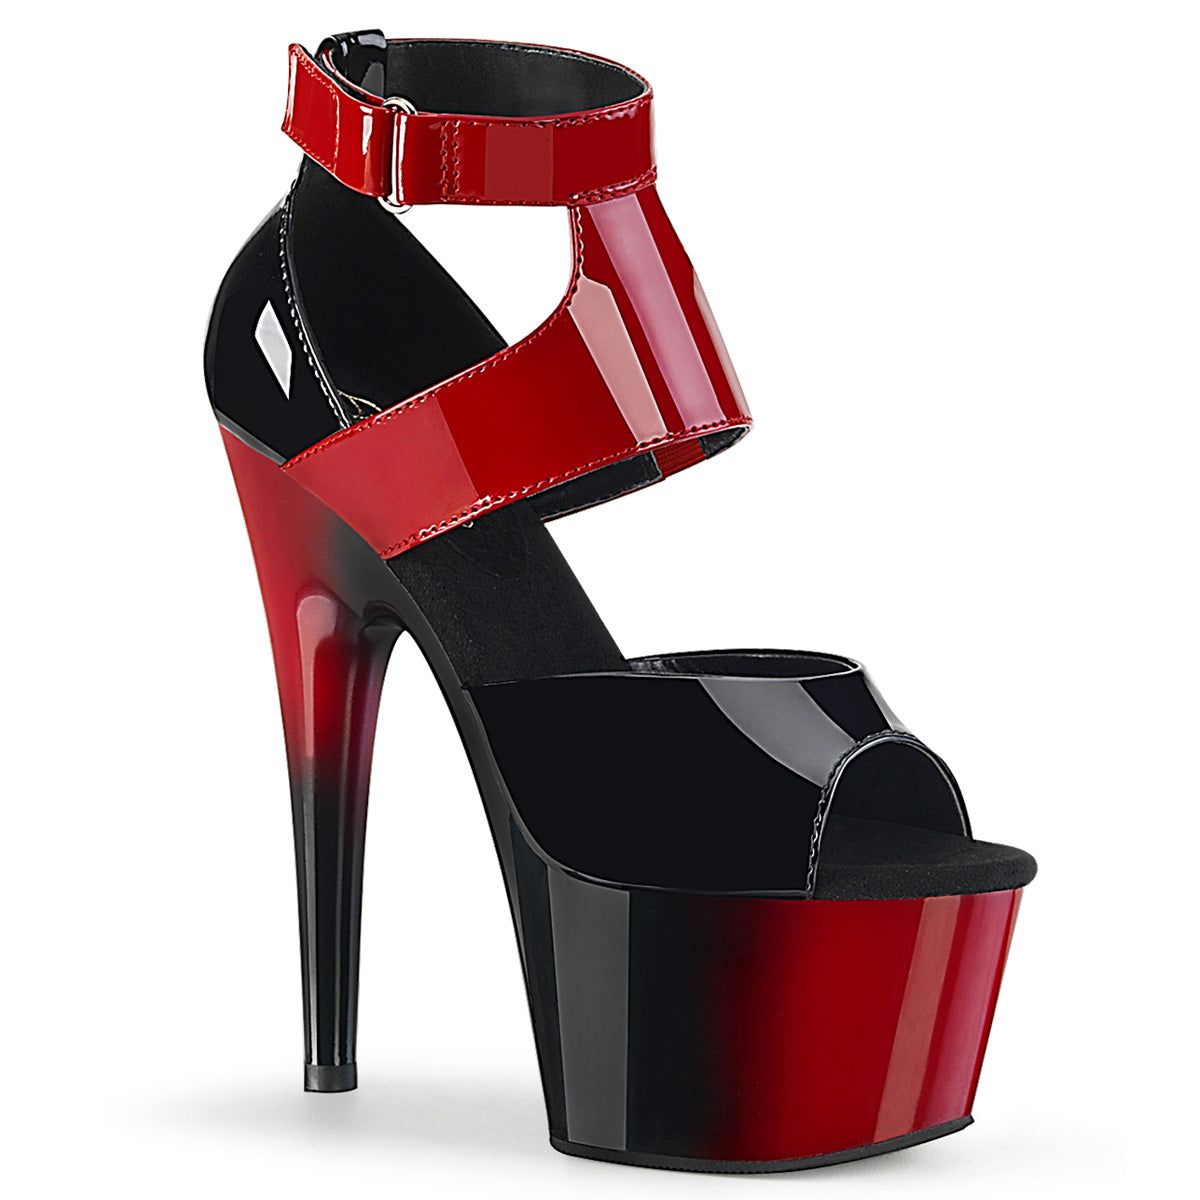 ADORE-700-16 Sexy 7" Heel Black and Red Sexy Sandals